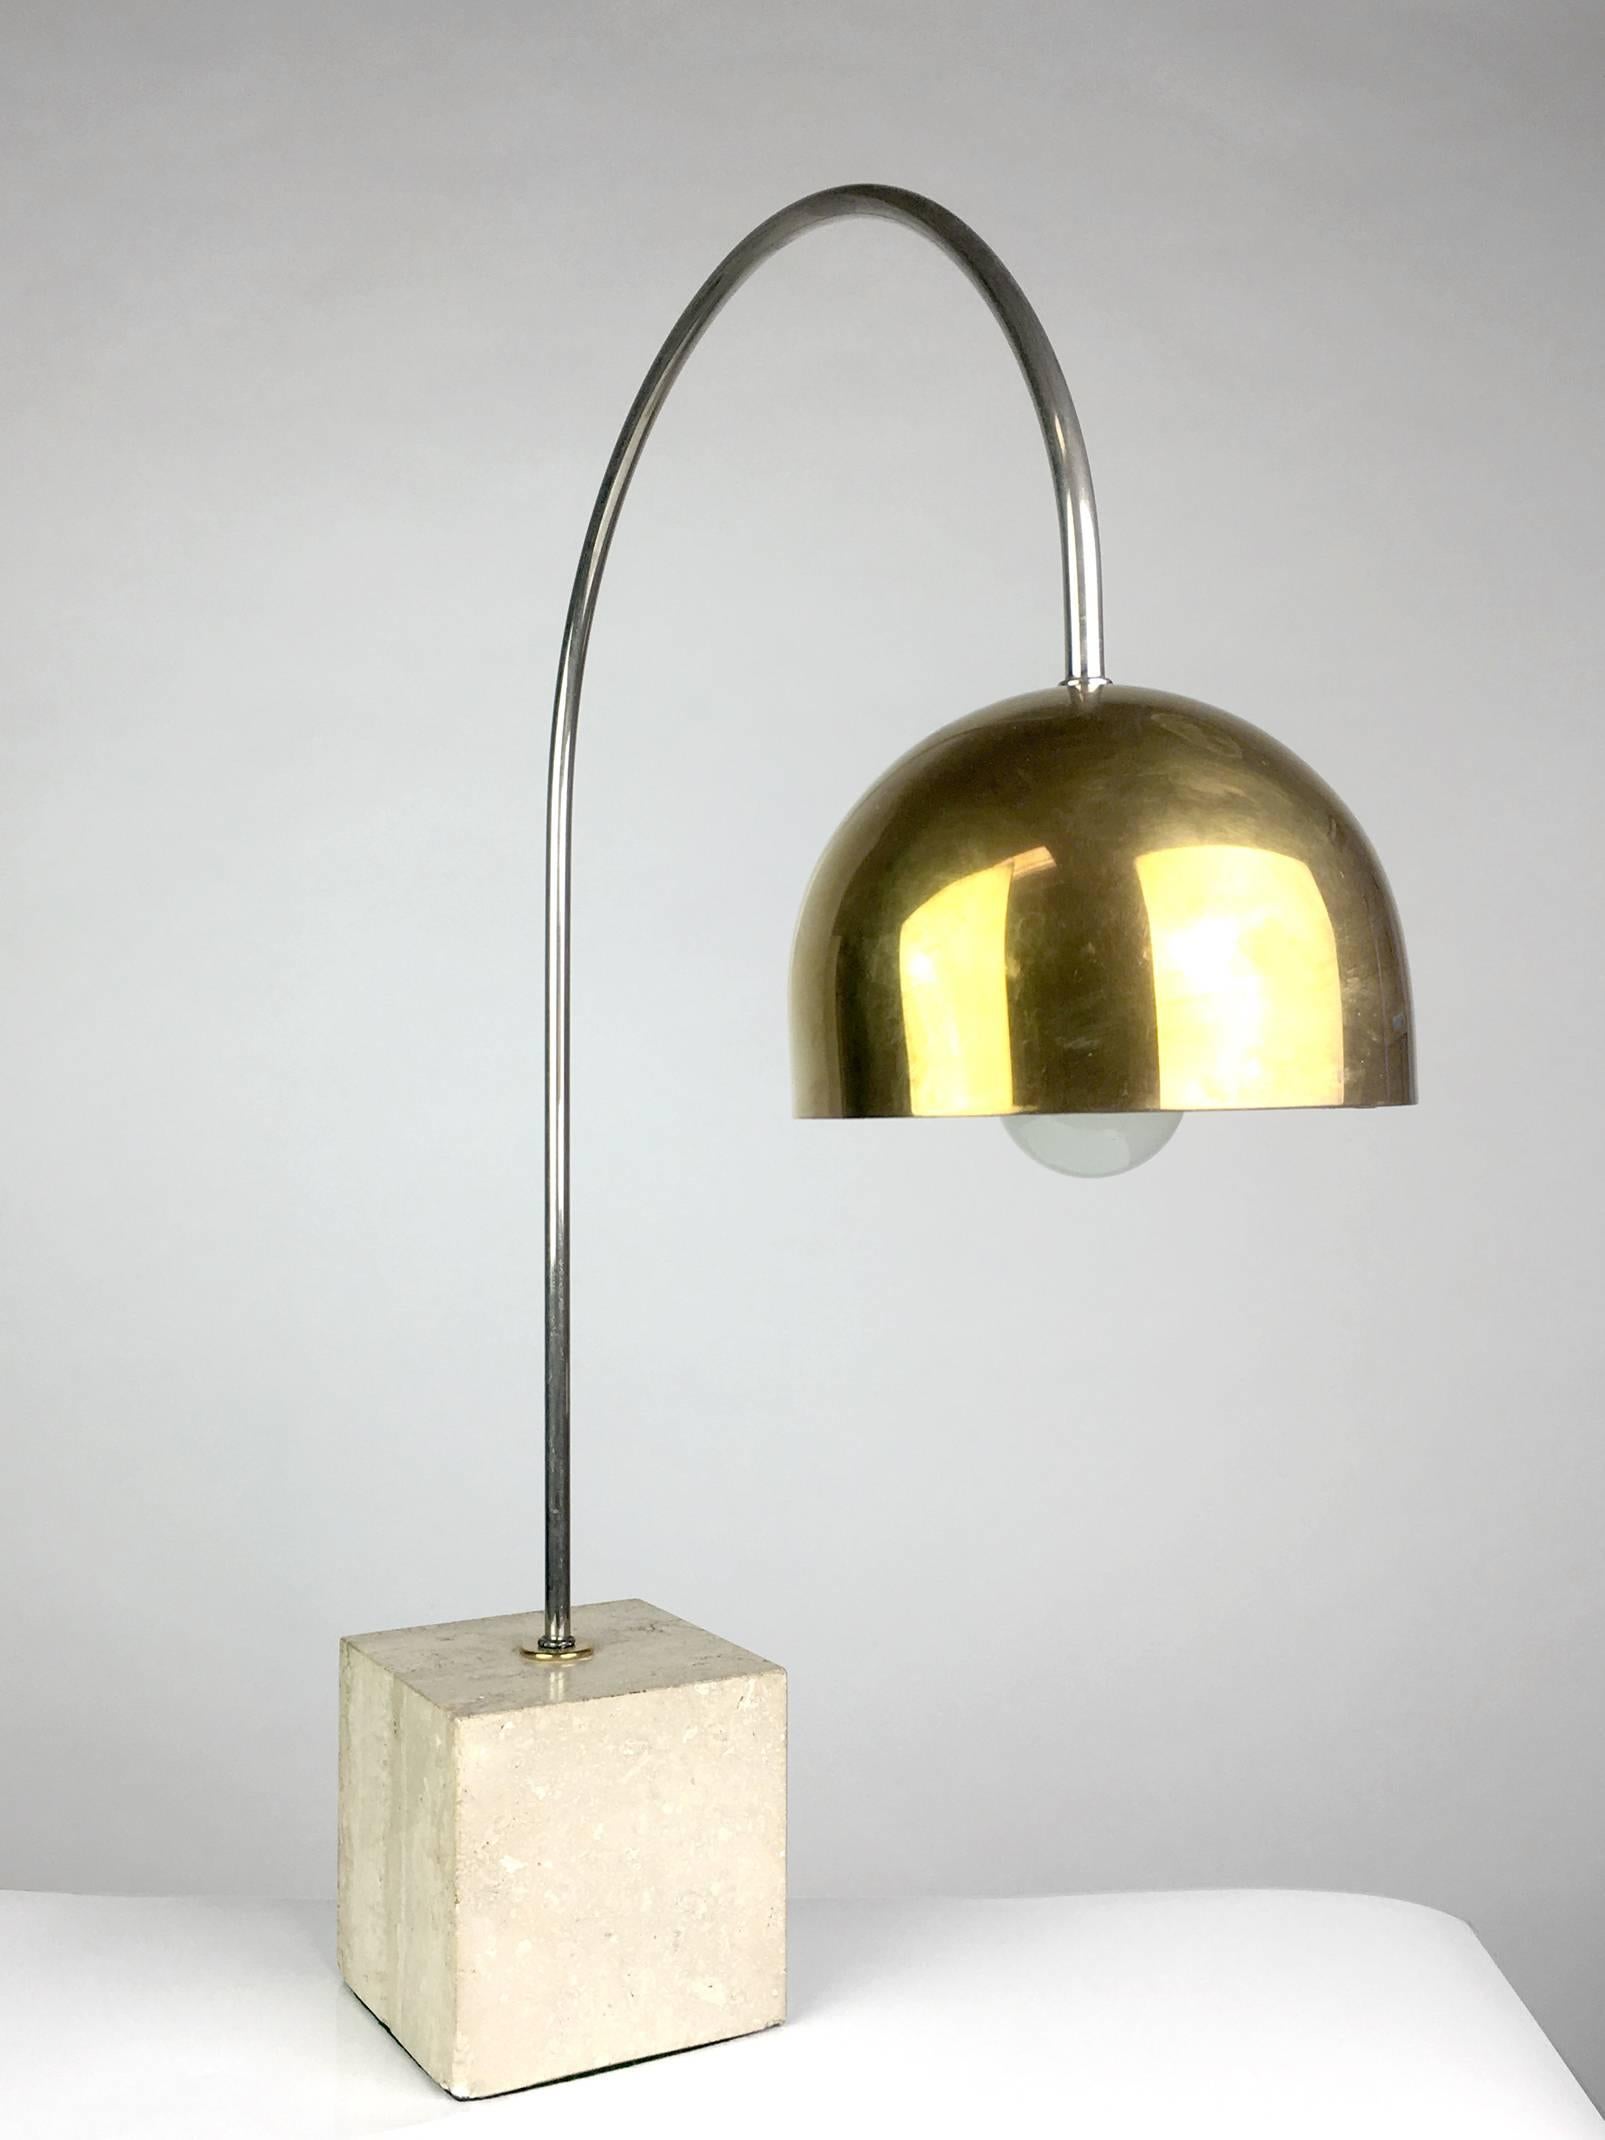 Chic brass, chrome and travertine desk lamp by Guzzini. Chrome arc with brass dome shade anchored by a travertine cube. Base is 5" x 5" x 5".
 